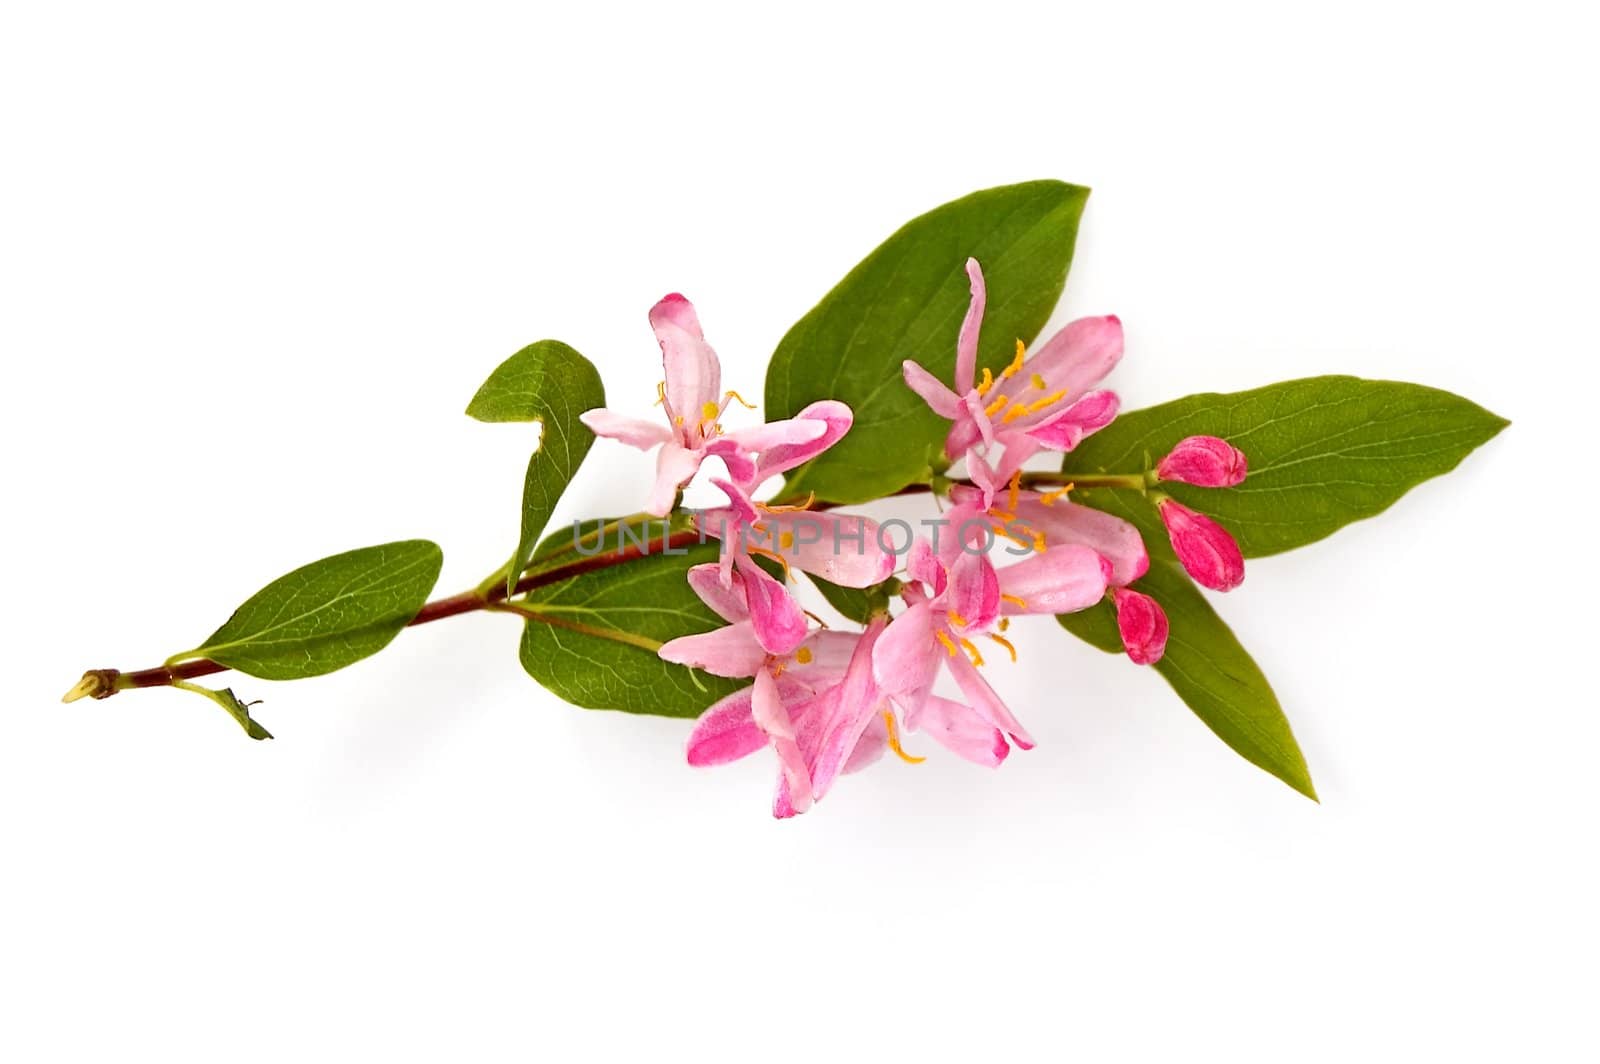 Flowering branch with pink flowers with green leaves on a white background